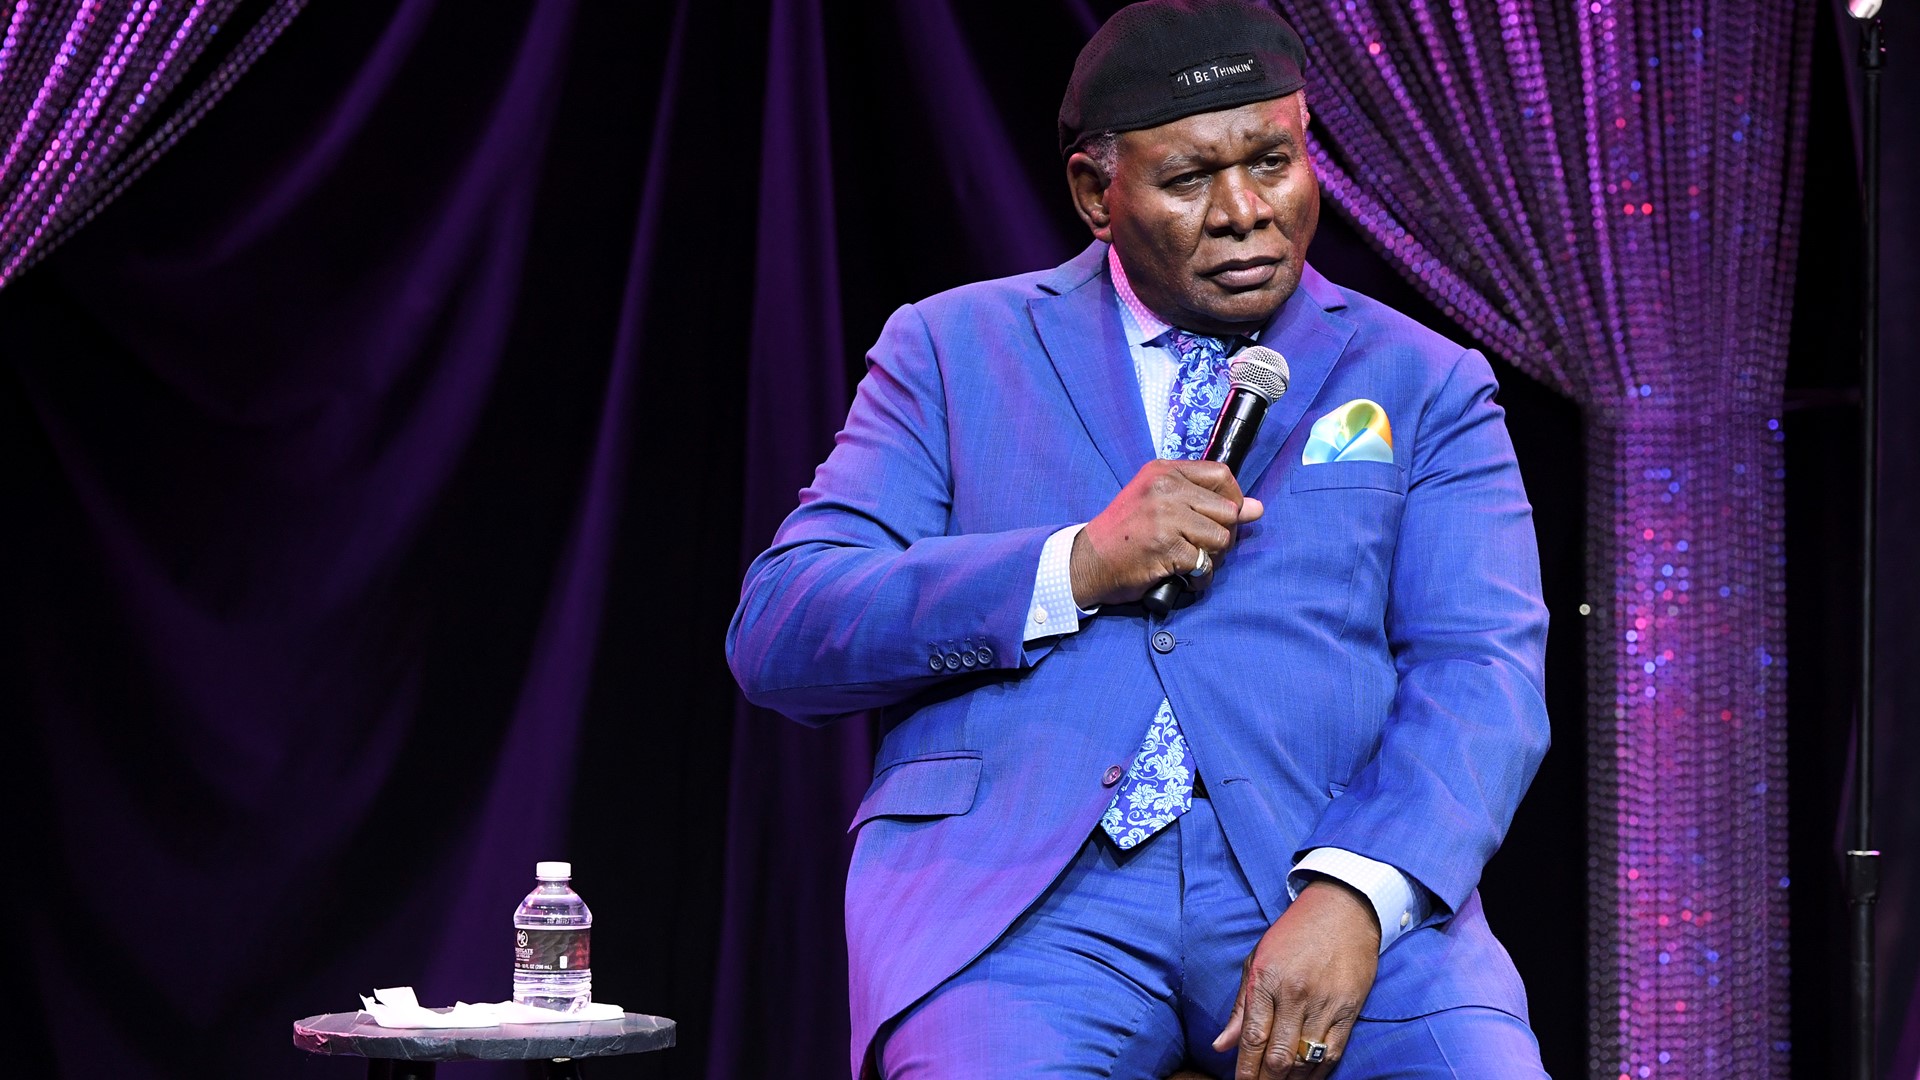 George Wallace returns to Las Vegas with new residency